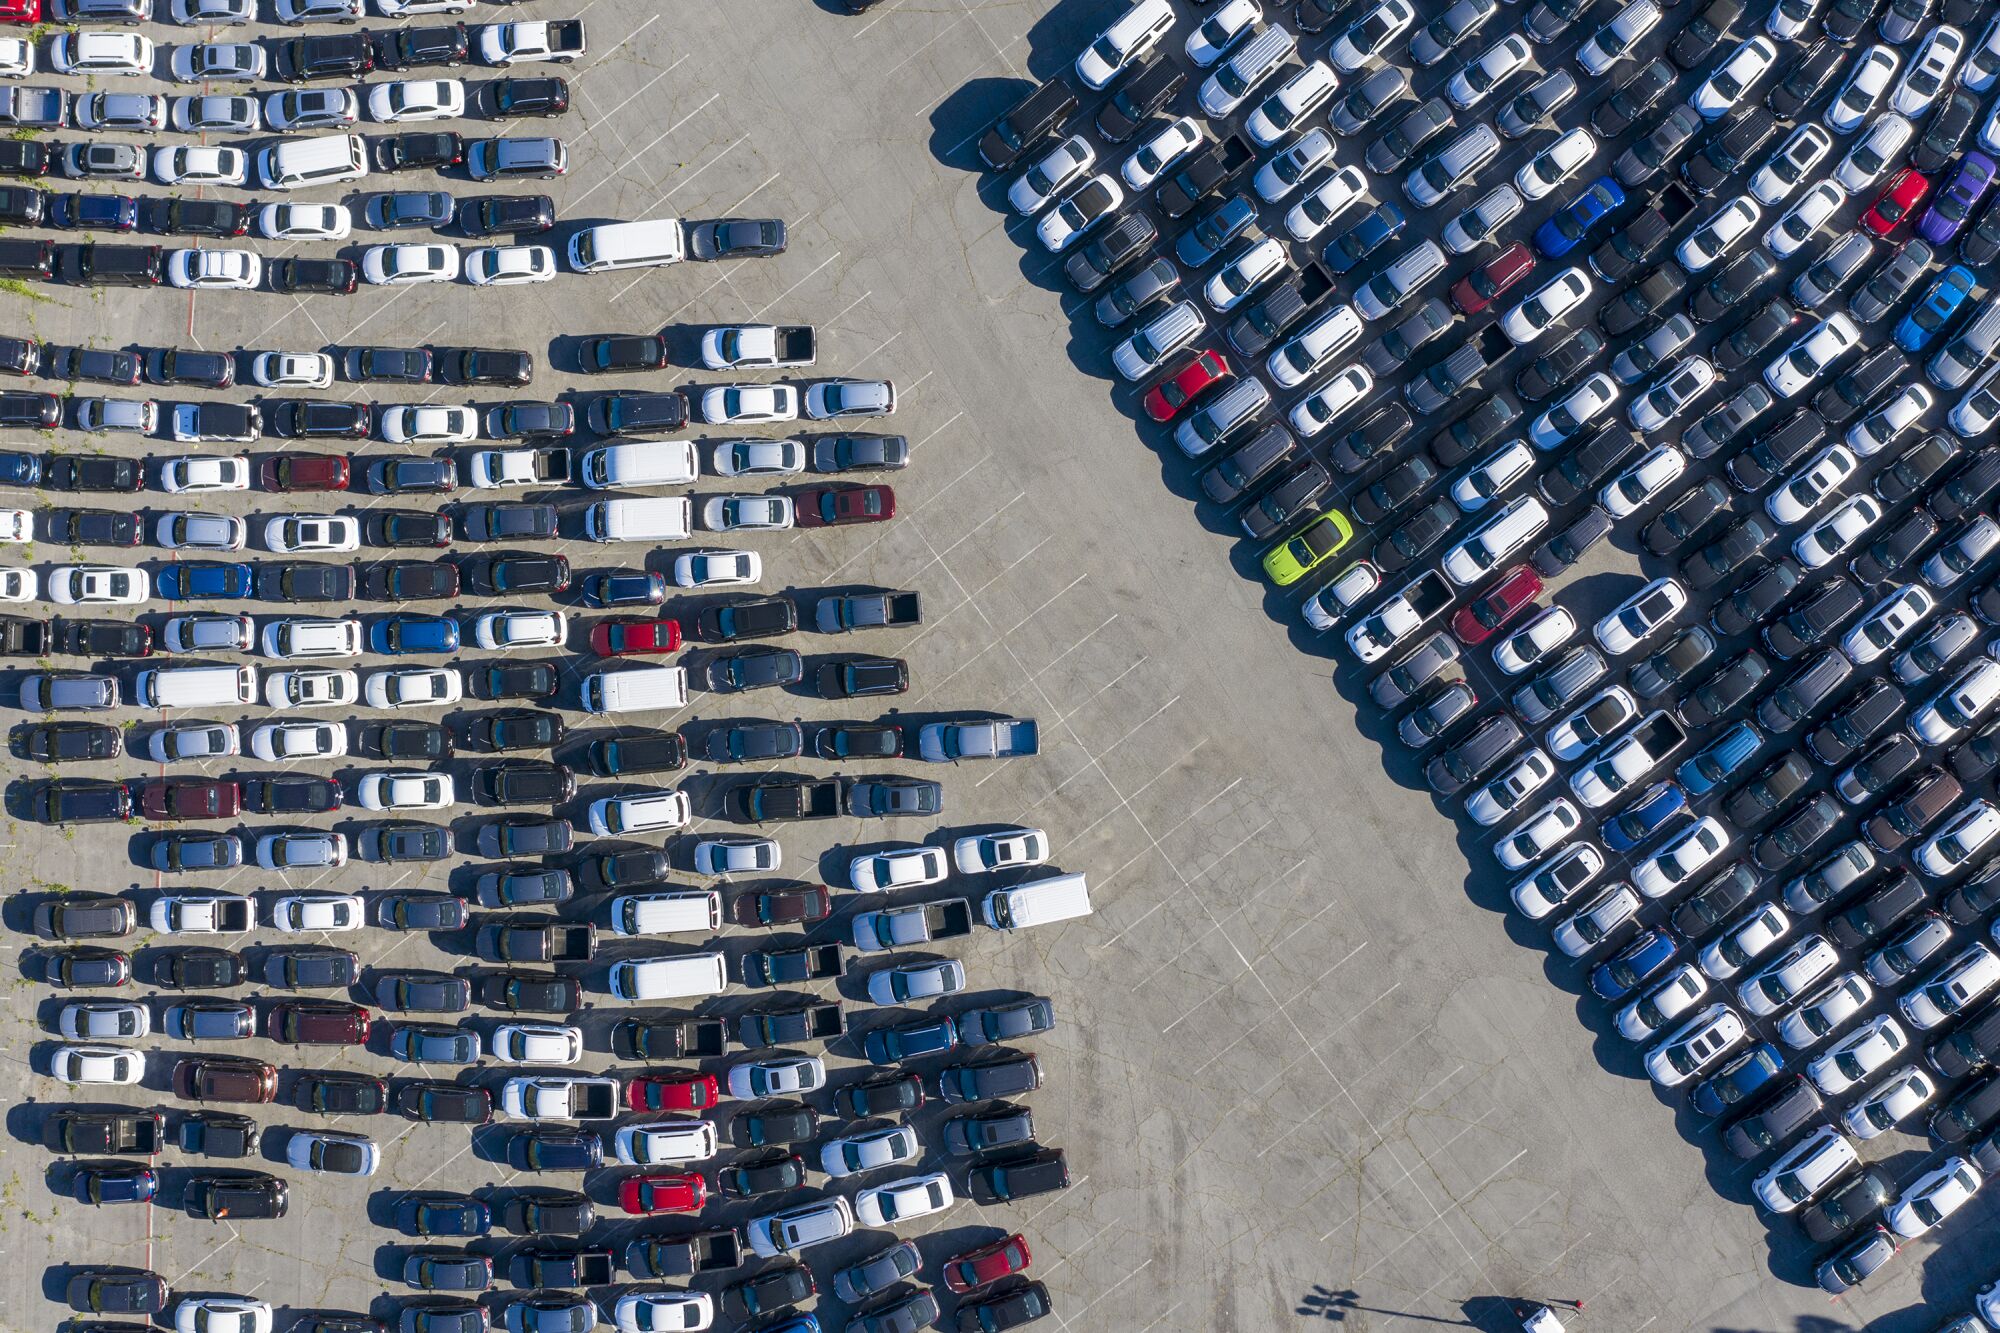 A drone takes a bird's-eye view of the cars stored at Dodger Stadium.